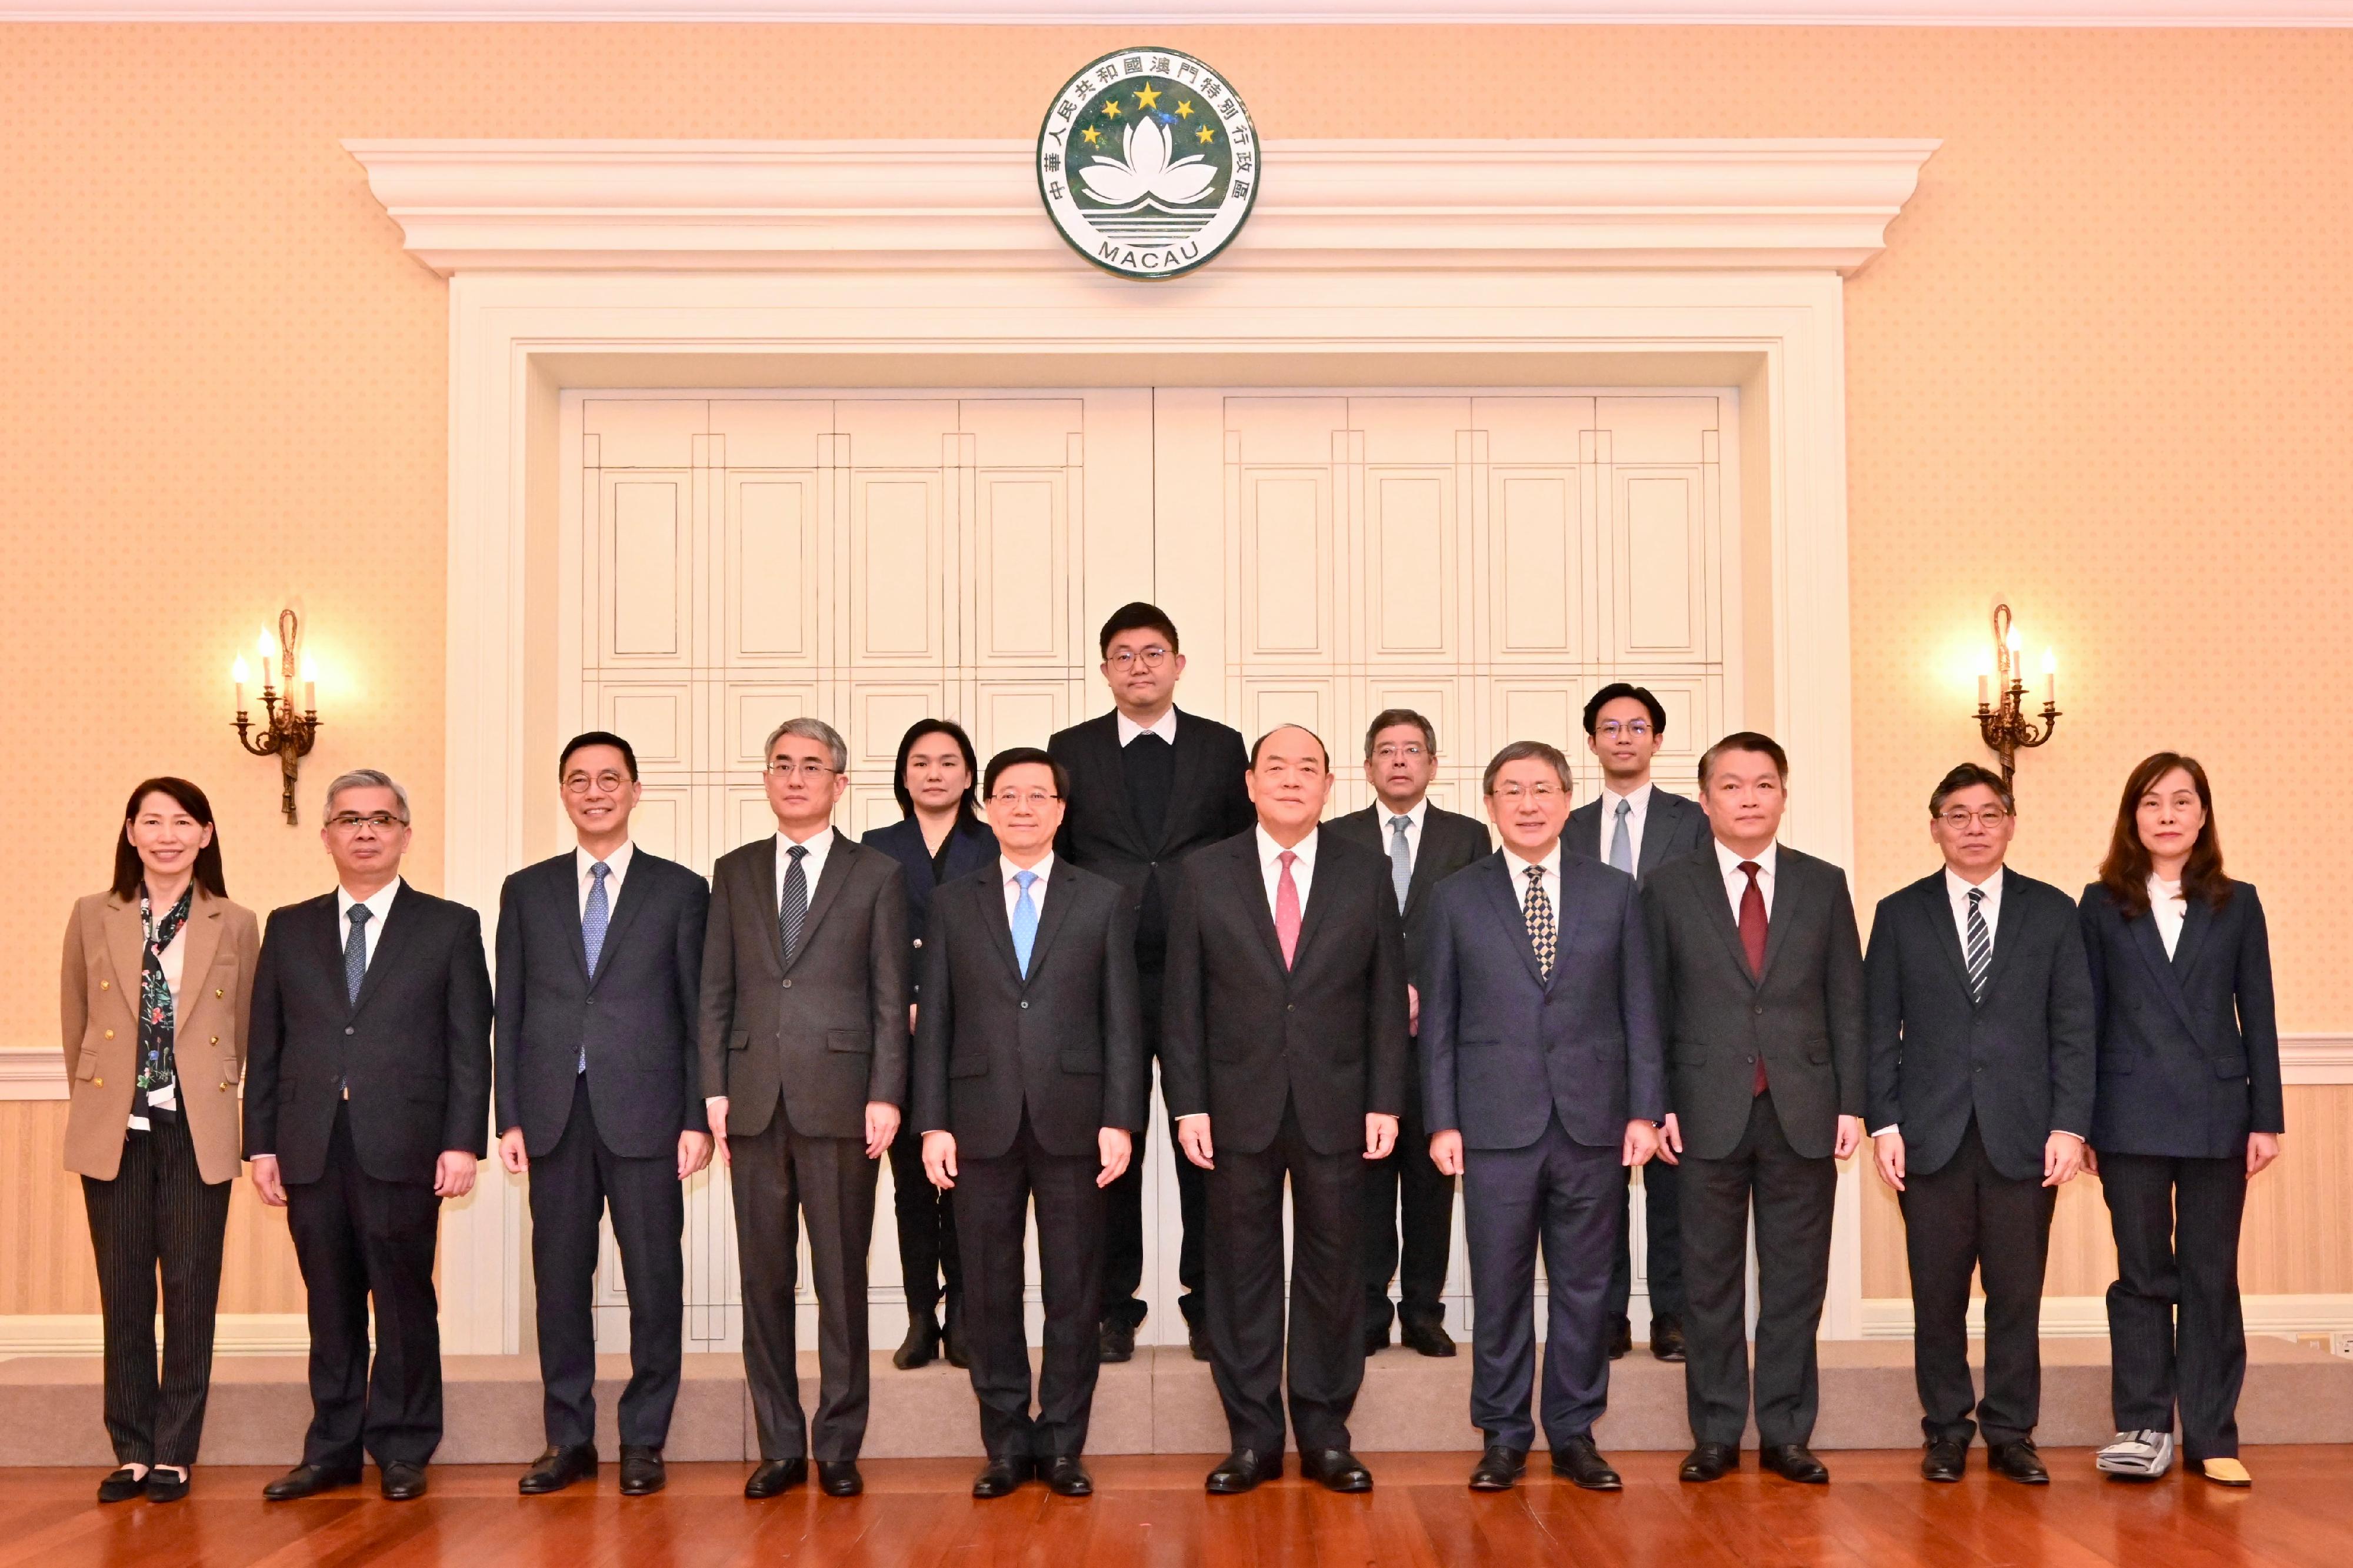 The Chief Executive, Mr John Lee, led a delegation to visit Macao, and met the Chief Executive of the Macao Special Administration Region (SAR), Mr Ho Iat-seng, today (March 2). Photo shows (front row, from left) the Director of the Chief Executive's Office, Ms Carol Yip; the Secretary for Security of the Macao SAR, Mr Wong Sio-chak; the Secretary for Culture, Sports and Tourism, Mr Kevin Yeung; the Secretary for Administration and Justice of the Macao SAR, Mr Cheong Weng-chon; Mr John Lee; the Chief Executive of the Macao SAR, Mr Ho Iat-seng; the Deputy Chief Secretary for Administration, Mr Cheuk Wing-hing; the Secretary for Economy and Finance of the Macao SAR, Mr Lei Wai-nong; the Secretary for Transport and Logistics, Mr Lam Sai-hung; the Secretary for Social Affairs and Culture of the Macao SAR, Ms Ao Ieong-u; (back row, from left) the Chief-of-Office of the Chief Executive's Office of the Macao SAR, Ms Hoi Lai-fong; the Assistant Director (Media) of the Chief Executive's Office, Mr Alex Chan; the Secretary for Transport and Public Works of the Macao SAR, Mr Raimundo Arrais do Rosário; and Assistant Private Secretary to the Chief Executive Mr Michael Li.